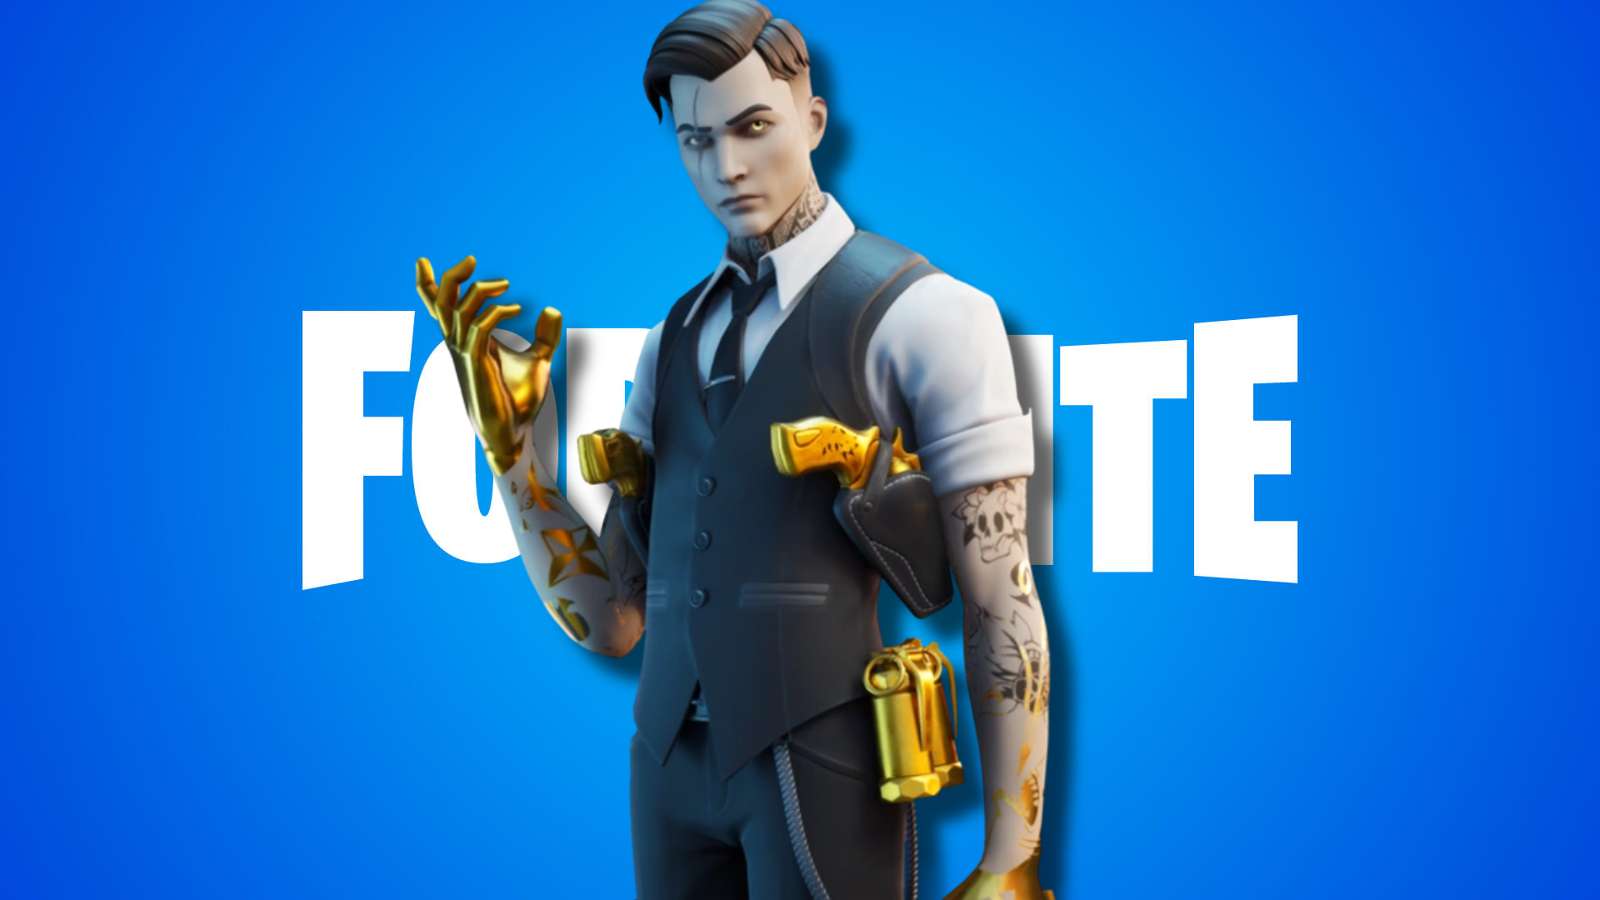 Midas from Fortnite standing over the game's logo.